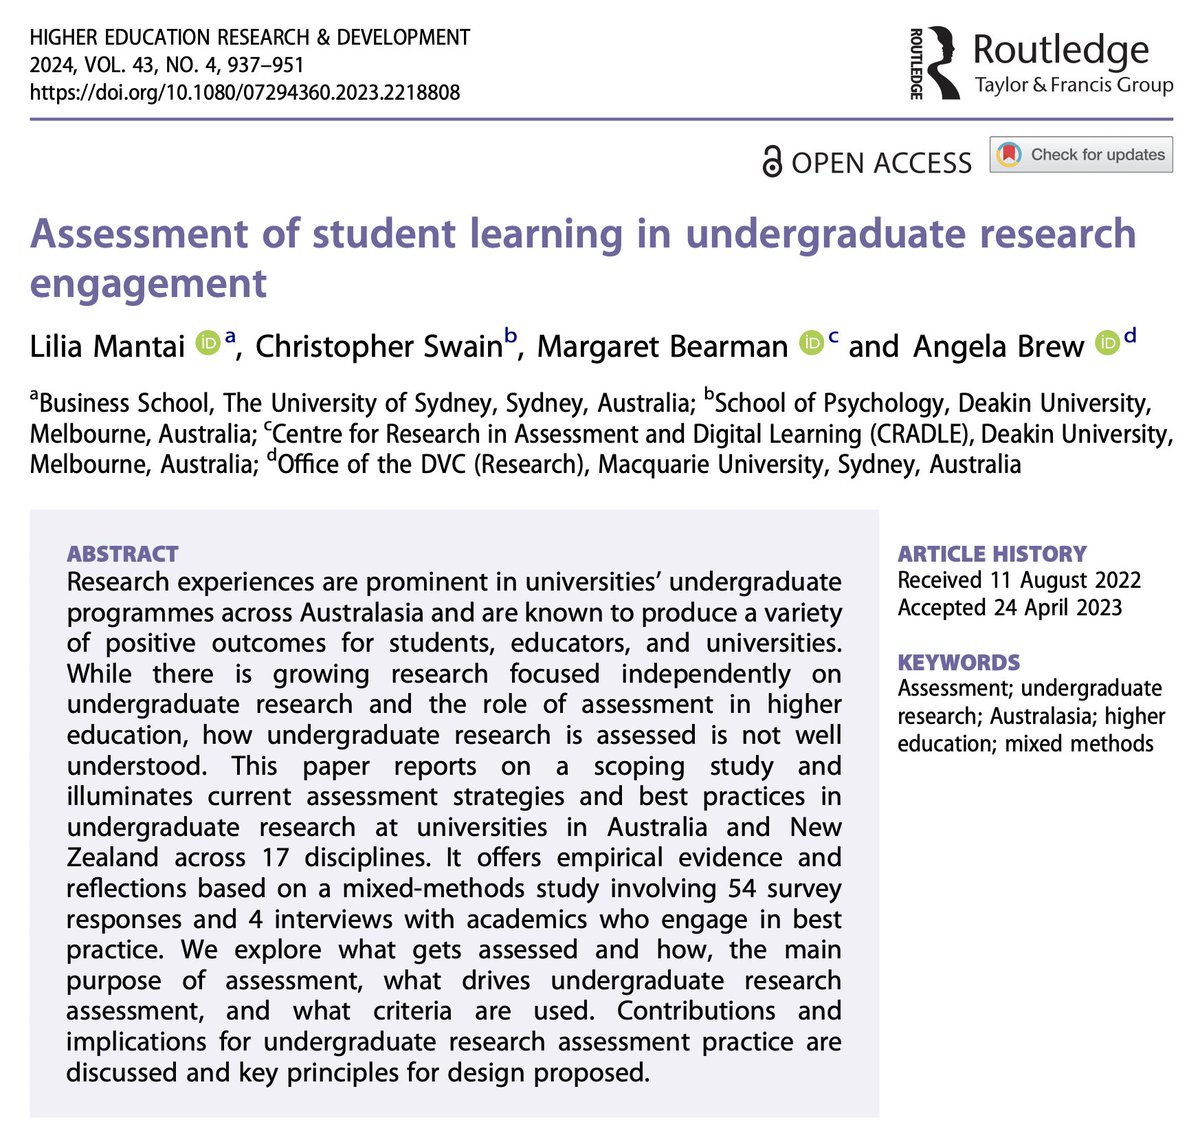 Assessment of student learning in undergraduate research engagement @LiliaMantai, Christopher Swain, @Margaret_Bea & @TheAngelaBrew 🔓→ doi.org/10.1080/072943… #HigherEd #StudentAssessment #UndergraduateResearch #Assessment #StudentResearch